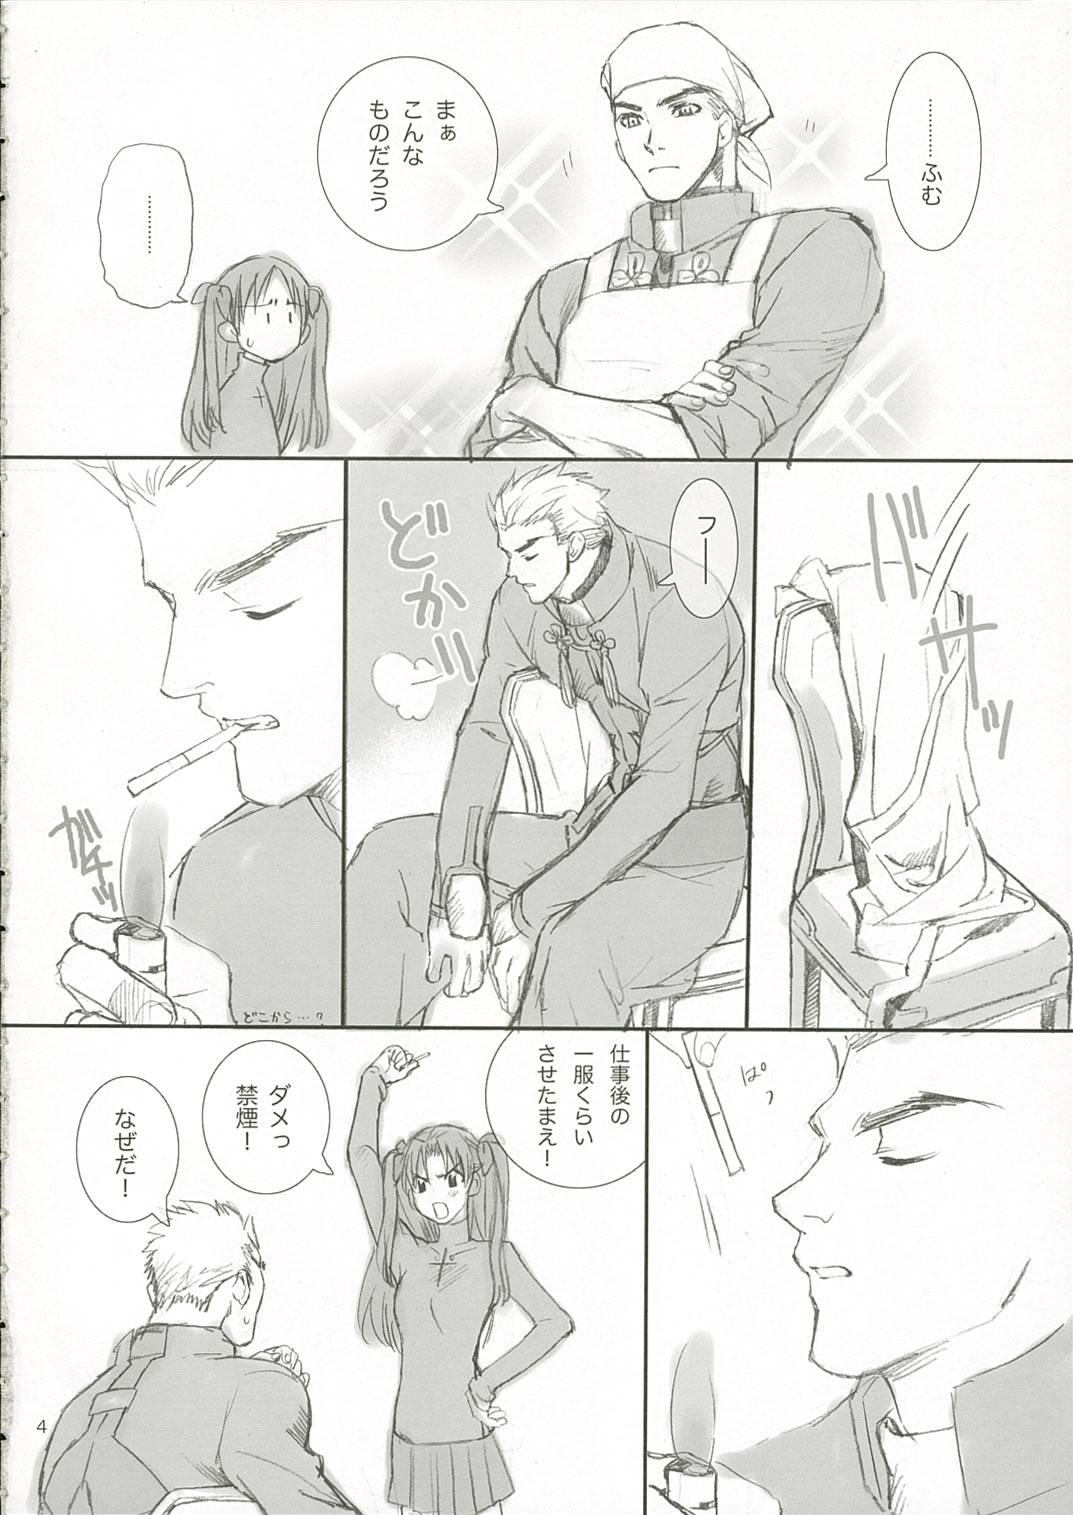 Shorts Candy - Fate stay night Innocent - Page 3